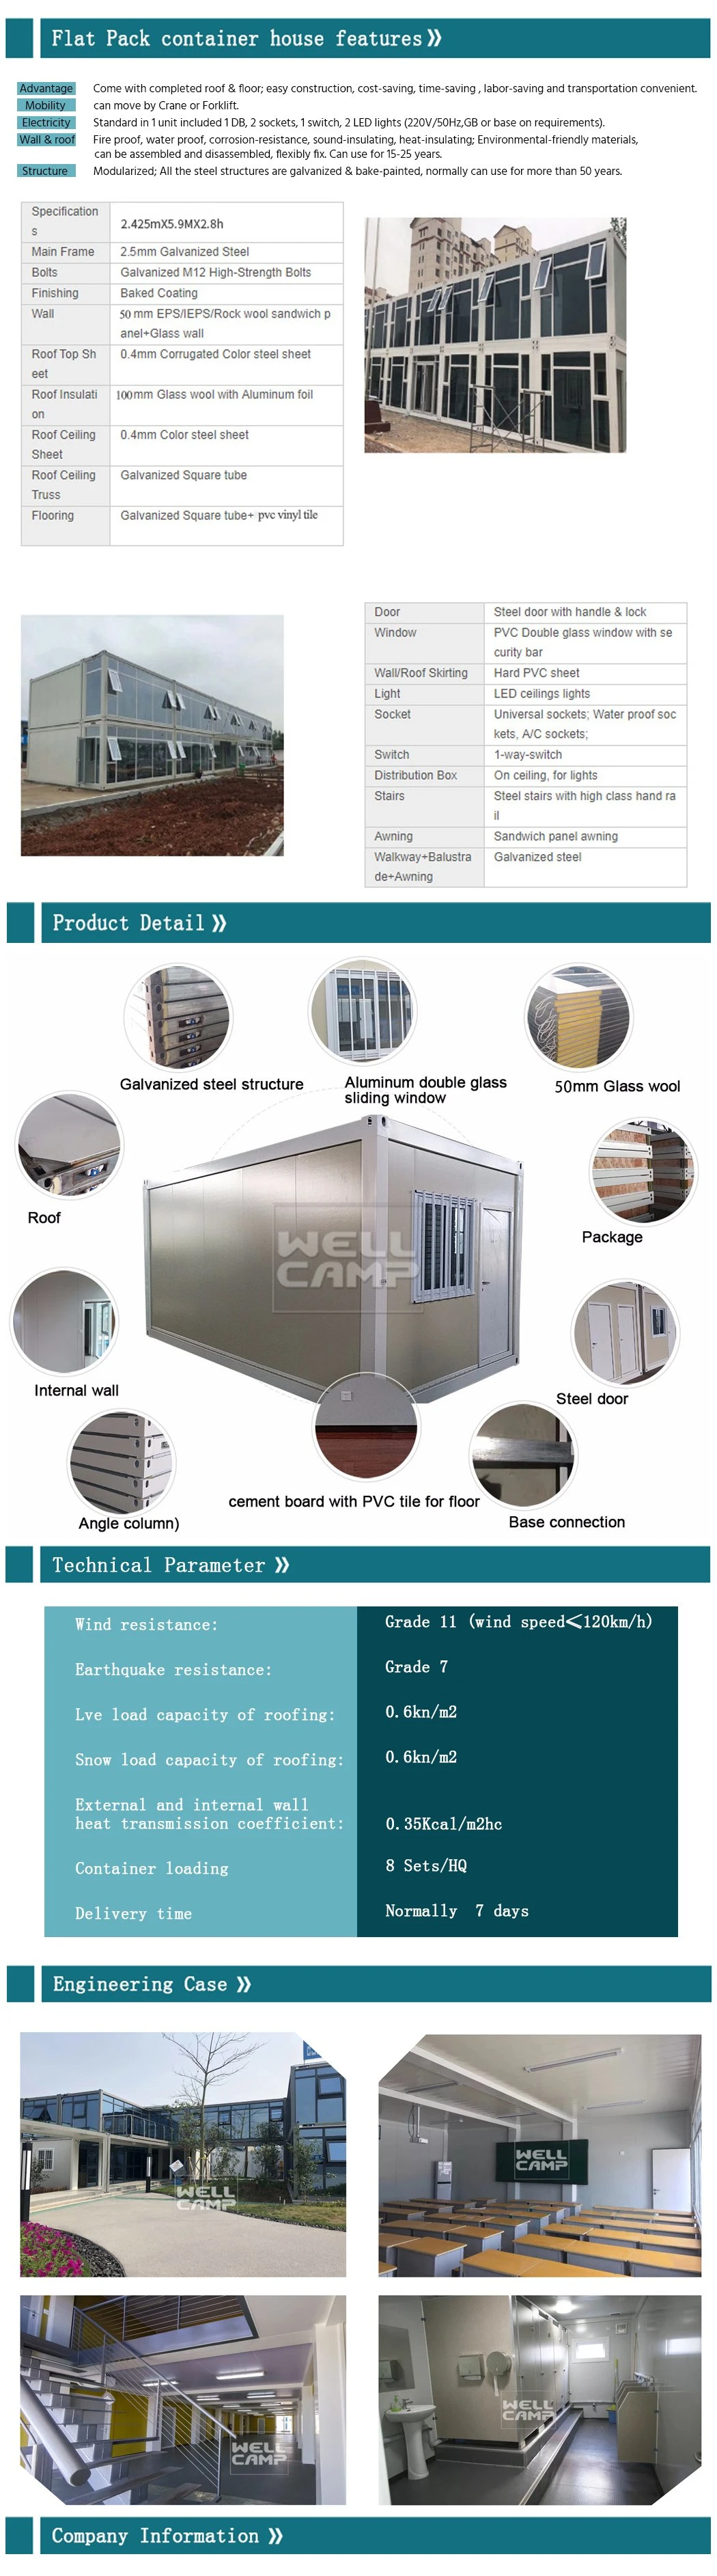 Labor Camp/ Shipping Container Prefab Flat Pack Container